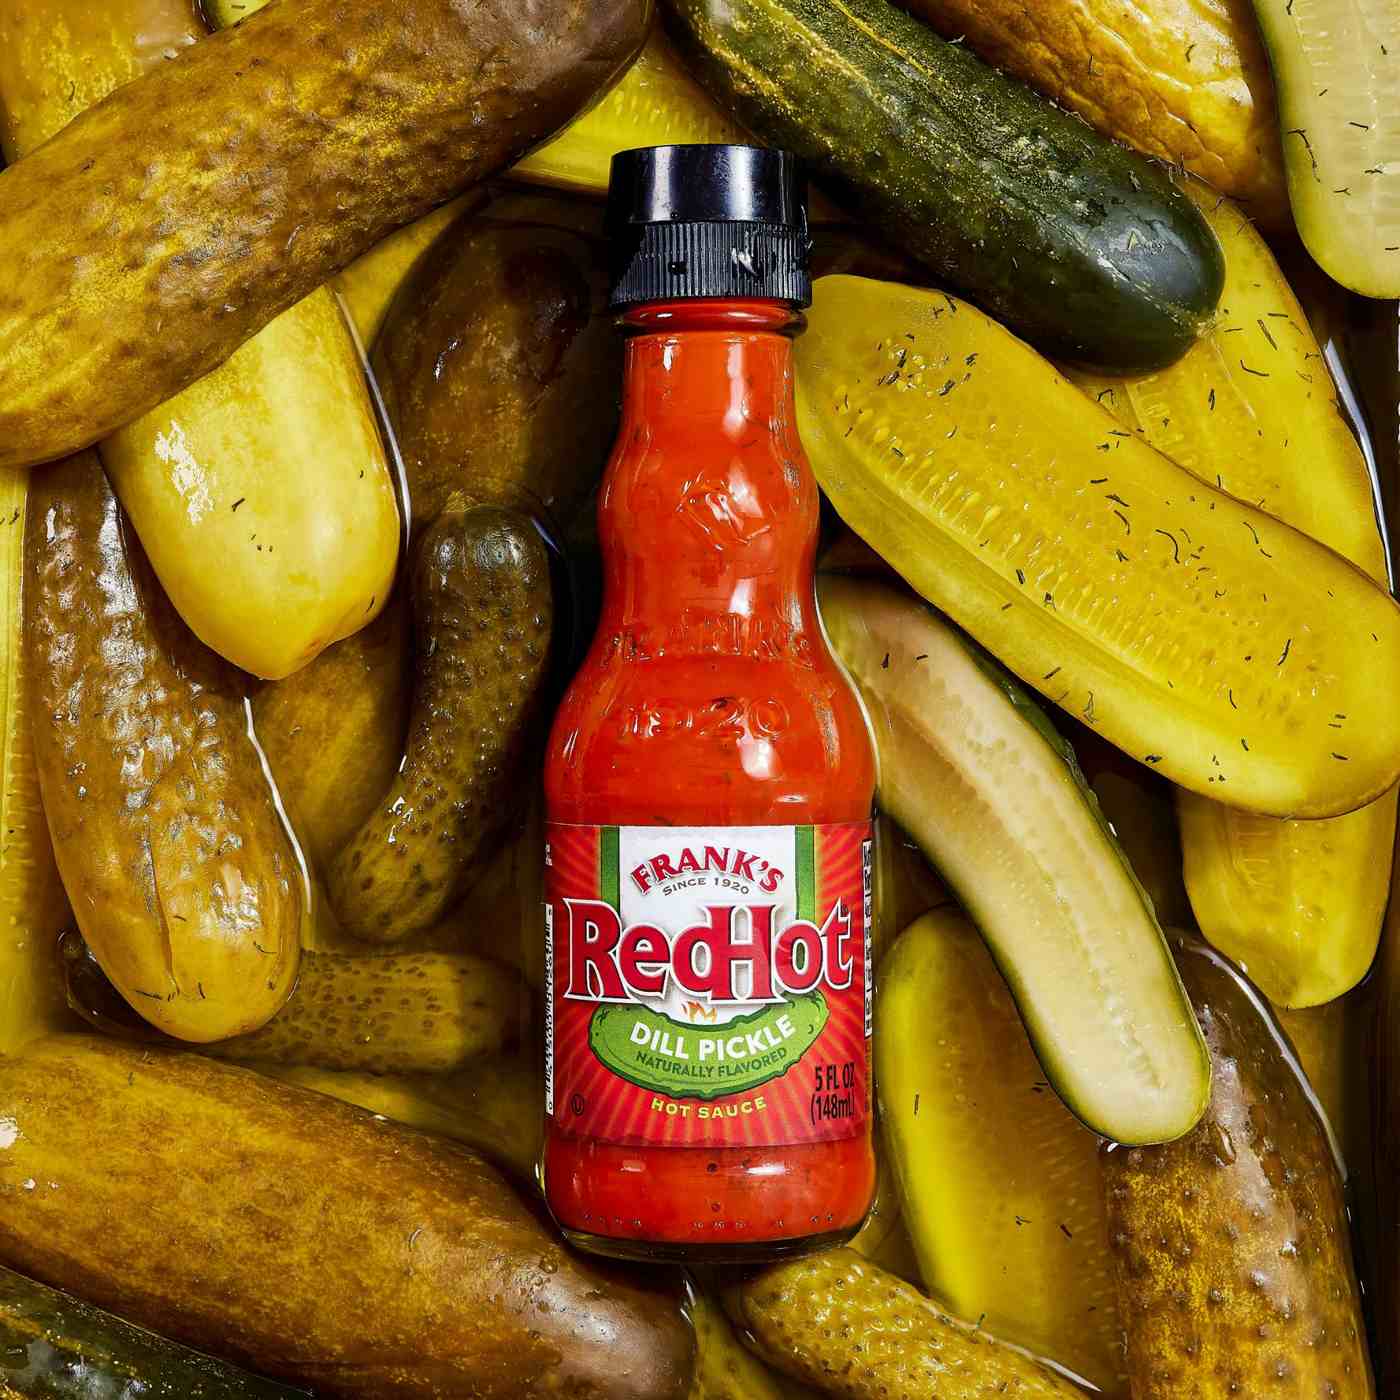 Frank's RedHot Dill Pickle Hot Sauce; image 6 of 8